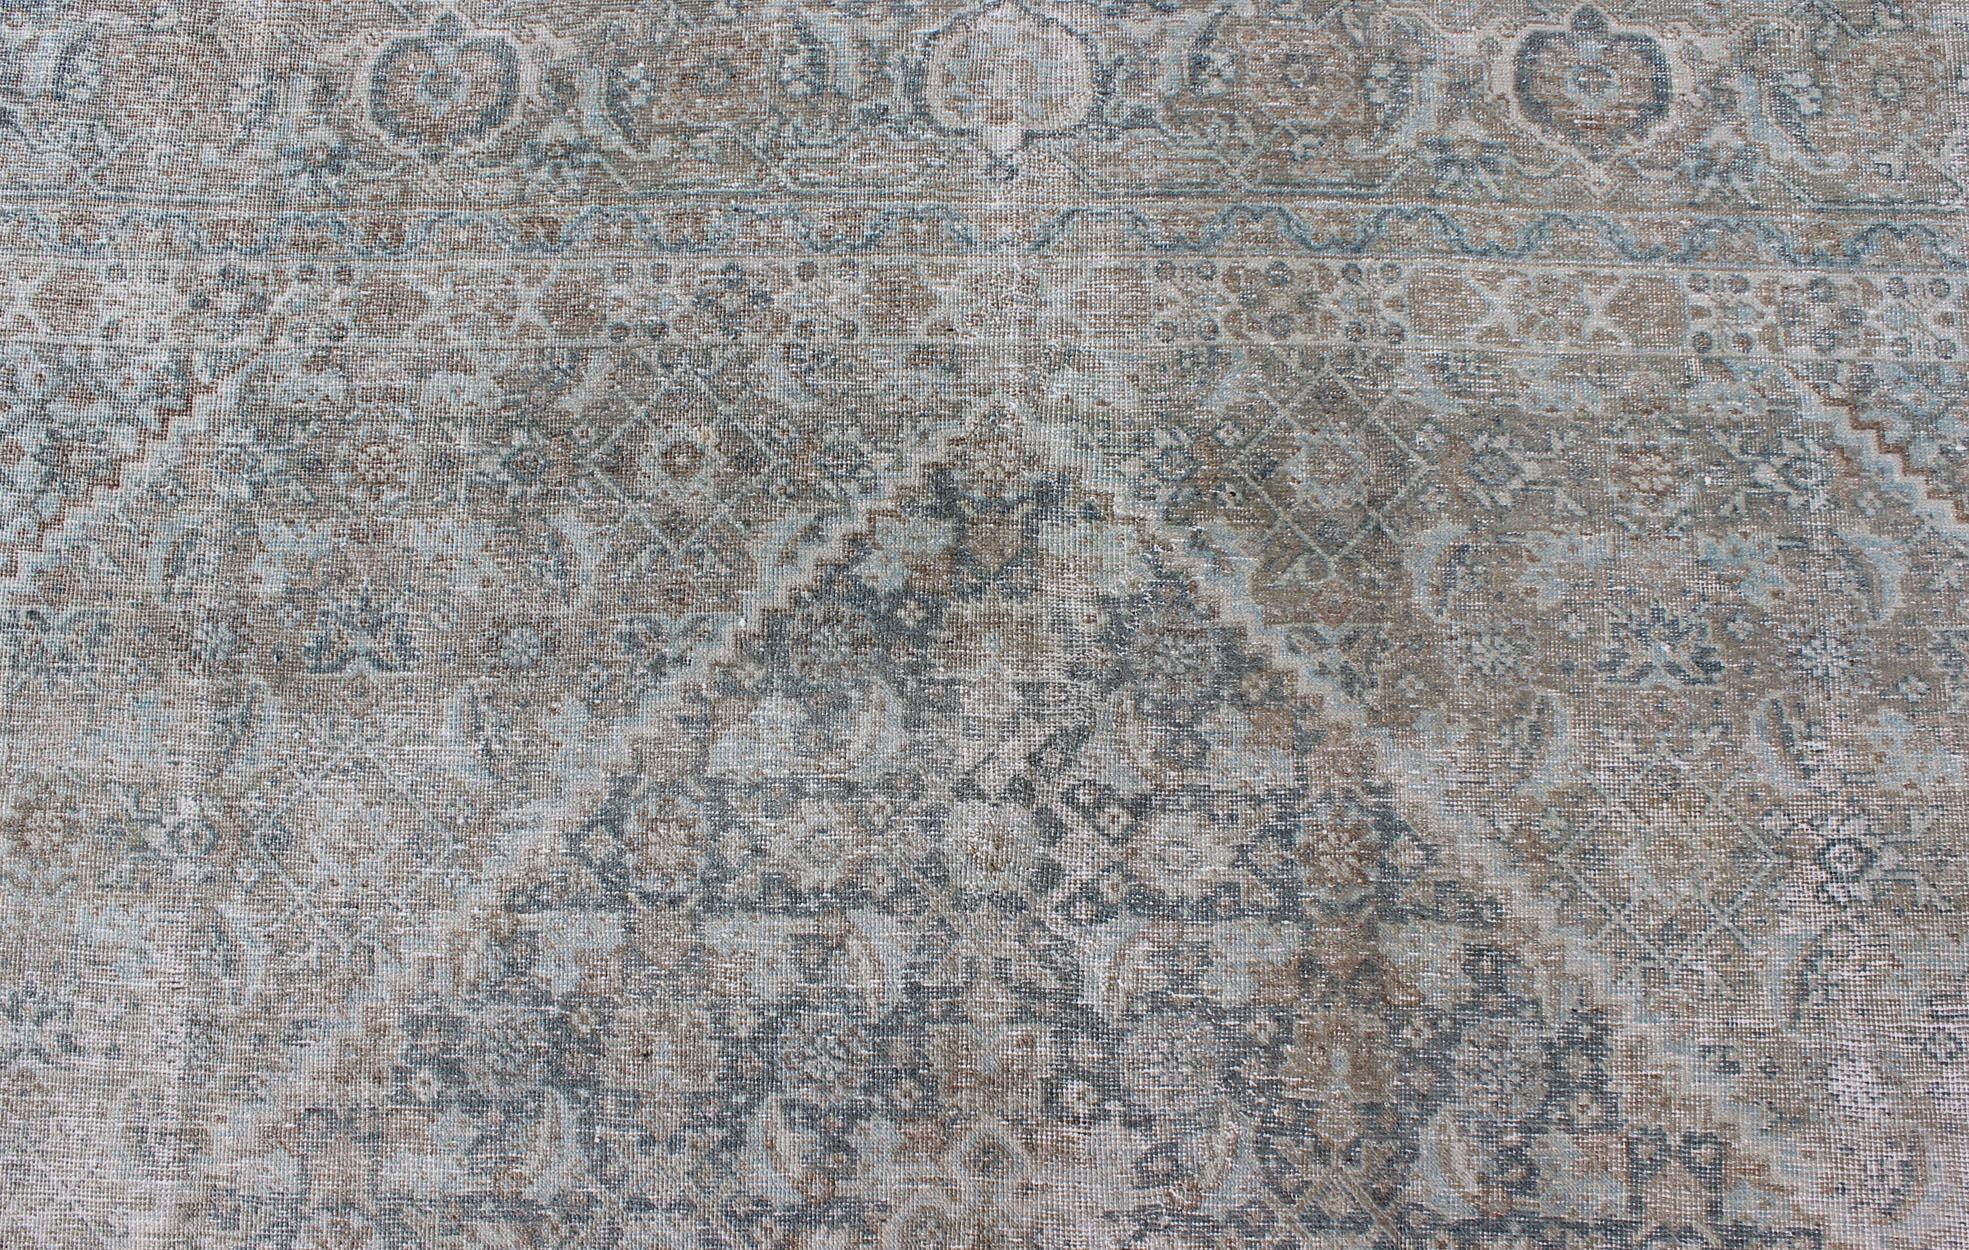 Early 20th Century Antique Persian Tabriz Rug in Muted Colors with Layered Medallion Design